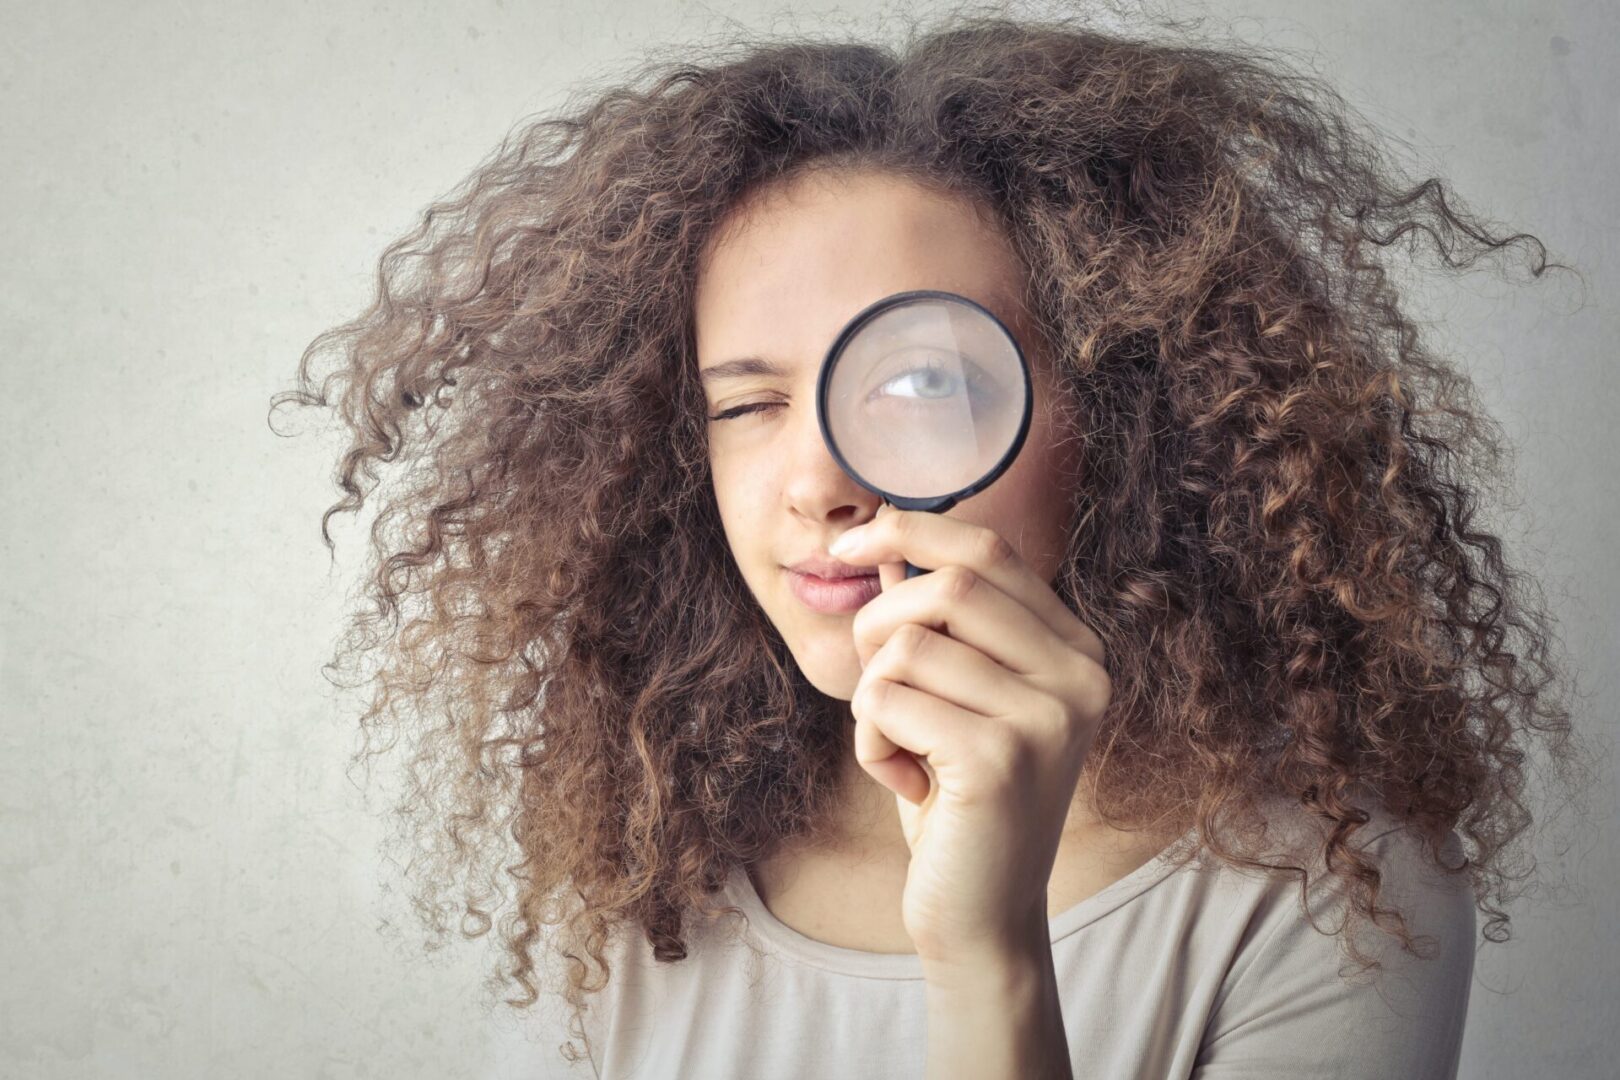 A woman holding a magnifying glass up to her face.